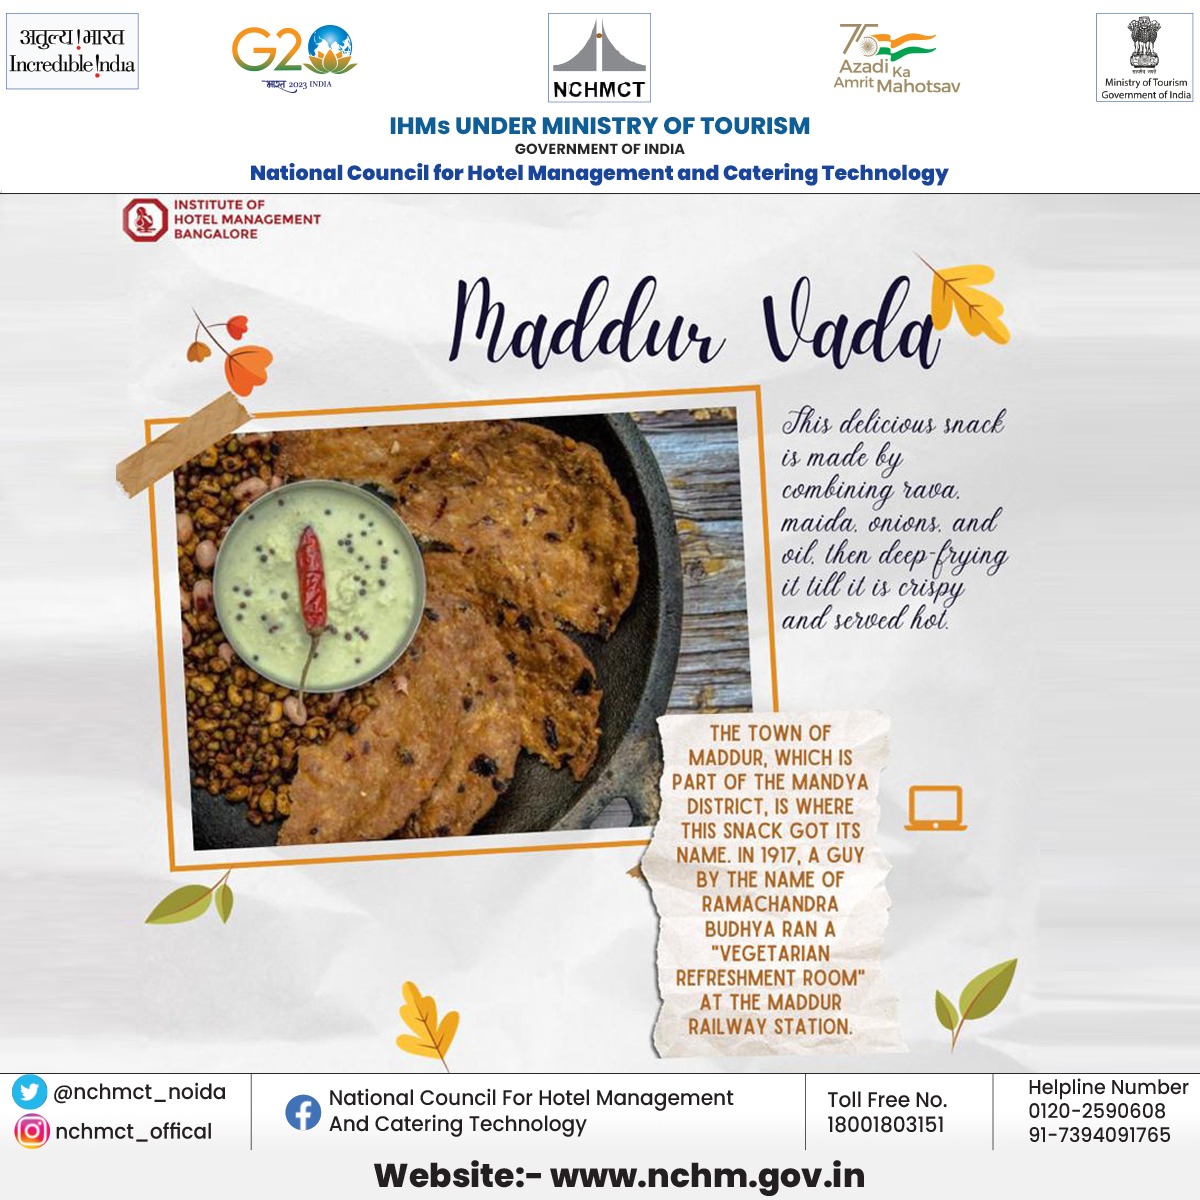 As a part of the ongoing month-long promotional program by NCHMCT in collaboration with Ministry of Tourism on regional cuisine, IHM Bengaluru presents 'Maddur Vada' a delicious snack from Mandya district of Karnataka.
#KarnatakaCuisine #CulinaryFest